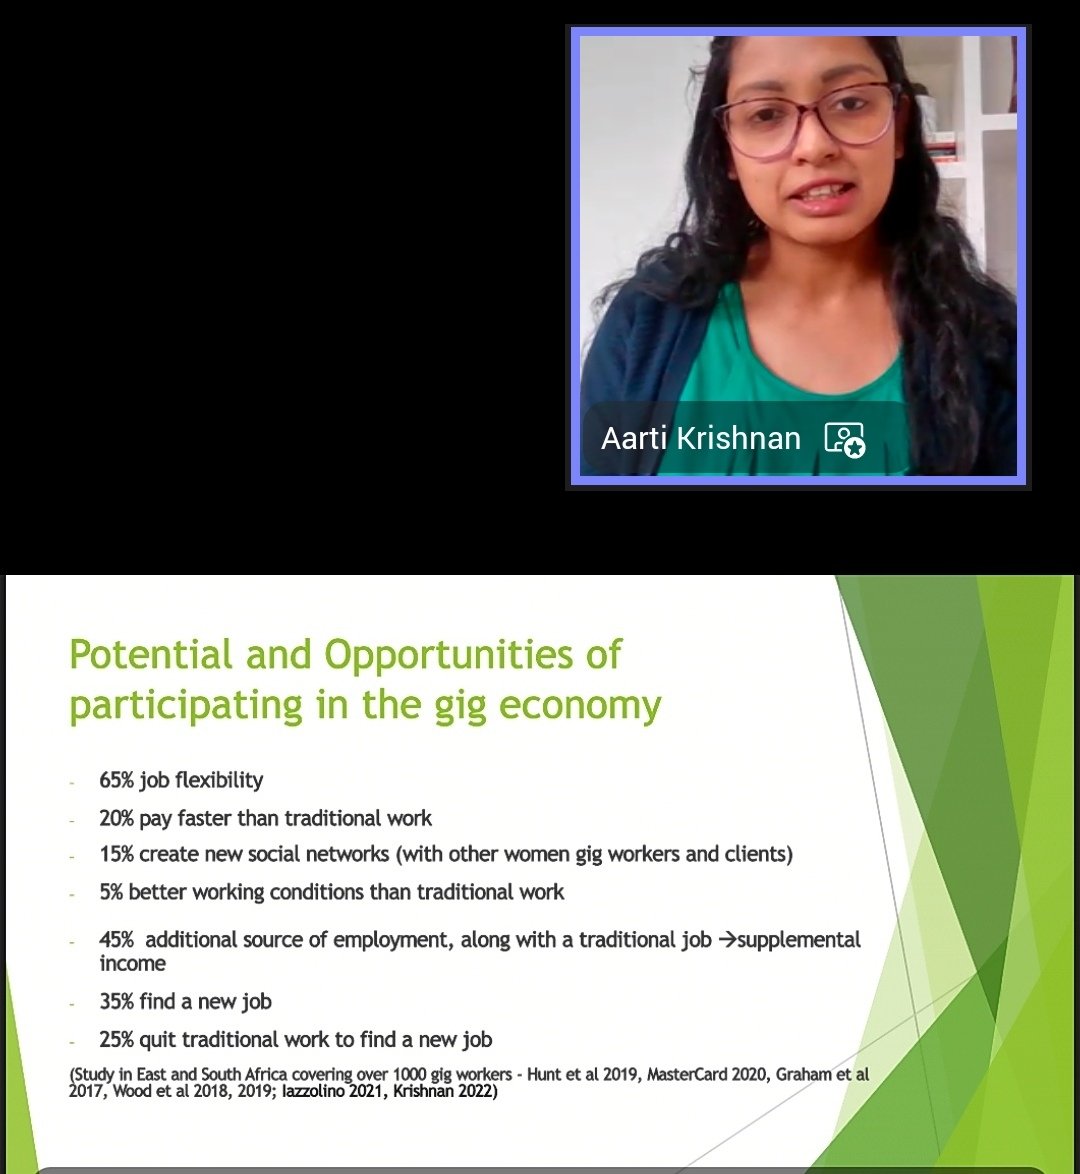 Dr. Aarti Krishnan shares great insights and numbers in regards to the potential and opportunities present in the Gig Economy.

#jiraForShe #WomenInTech #DTCkenya #GIZ #GigEconomy #fairwork
 #DigitalGlobal @eMobilis